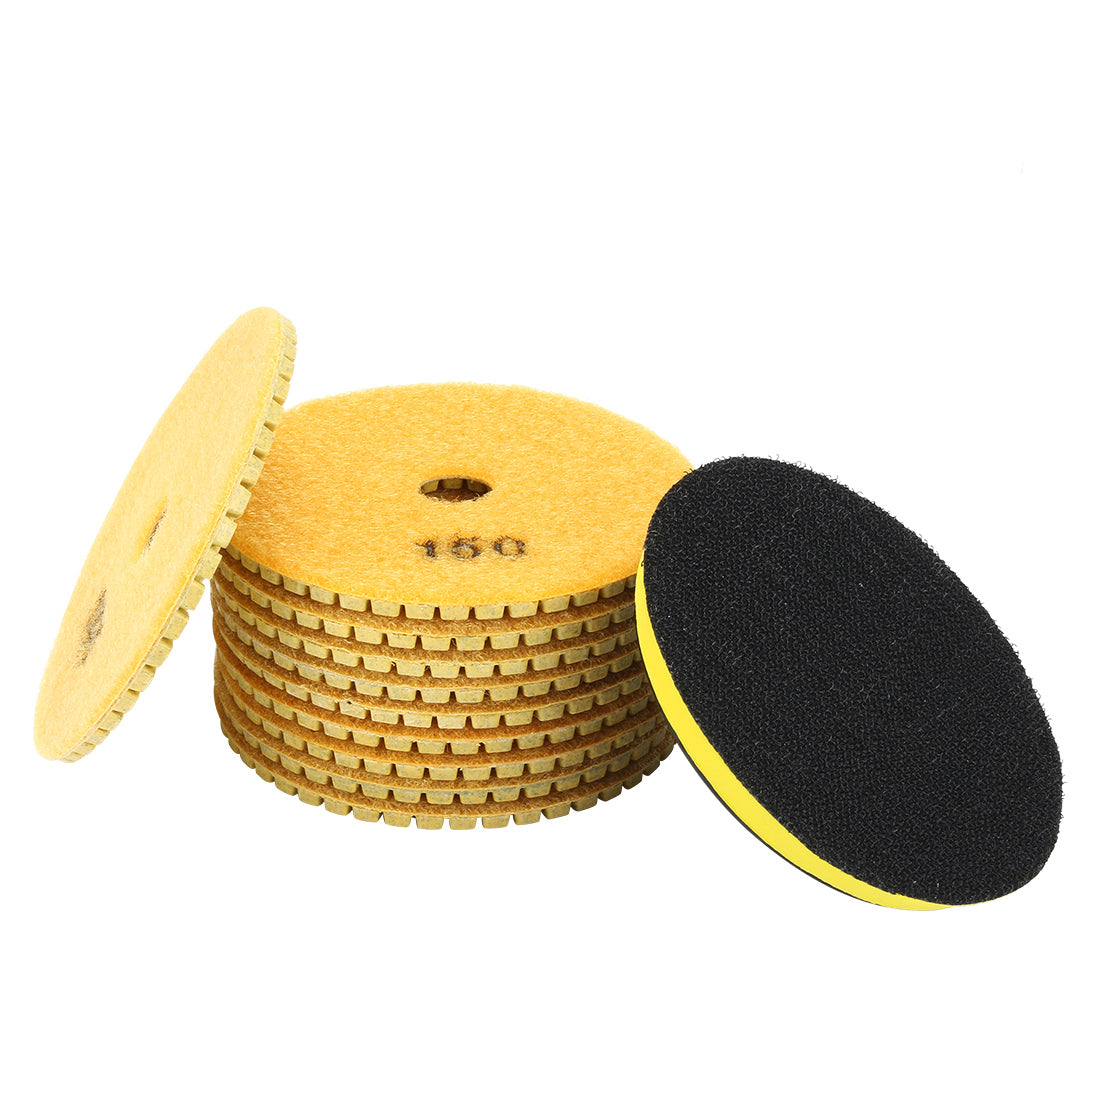 uxcell Uxcell 4" Diamond Wet Polishing Pad Disc Grit 150 10pcs for Granite Concrete Marble